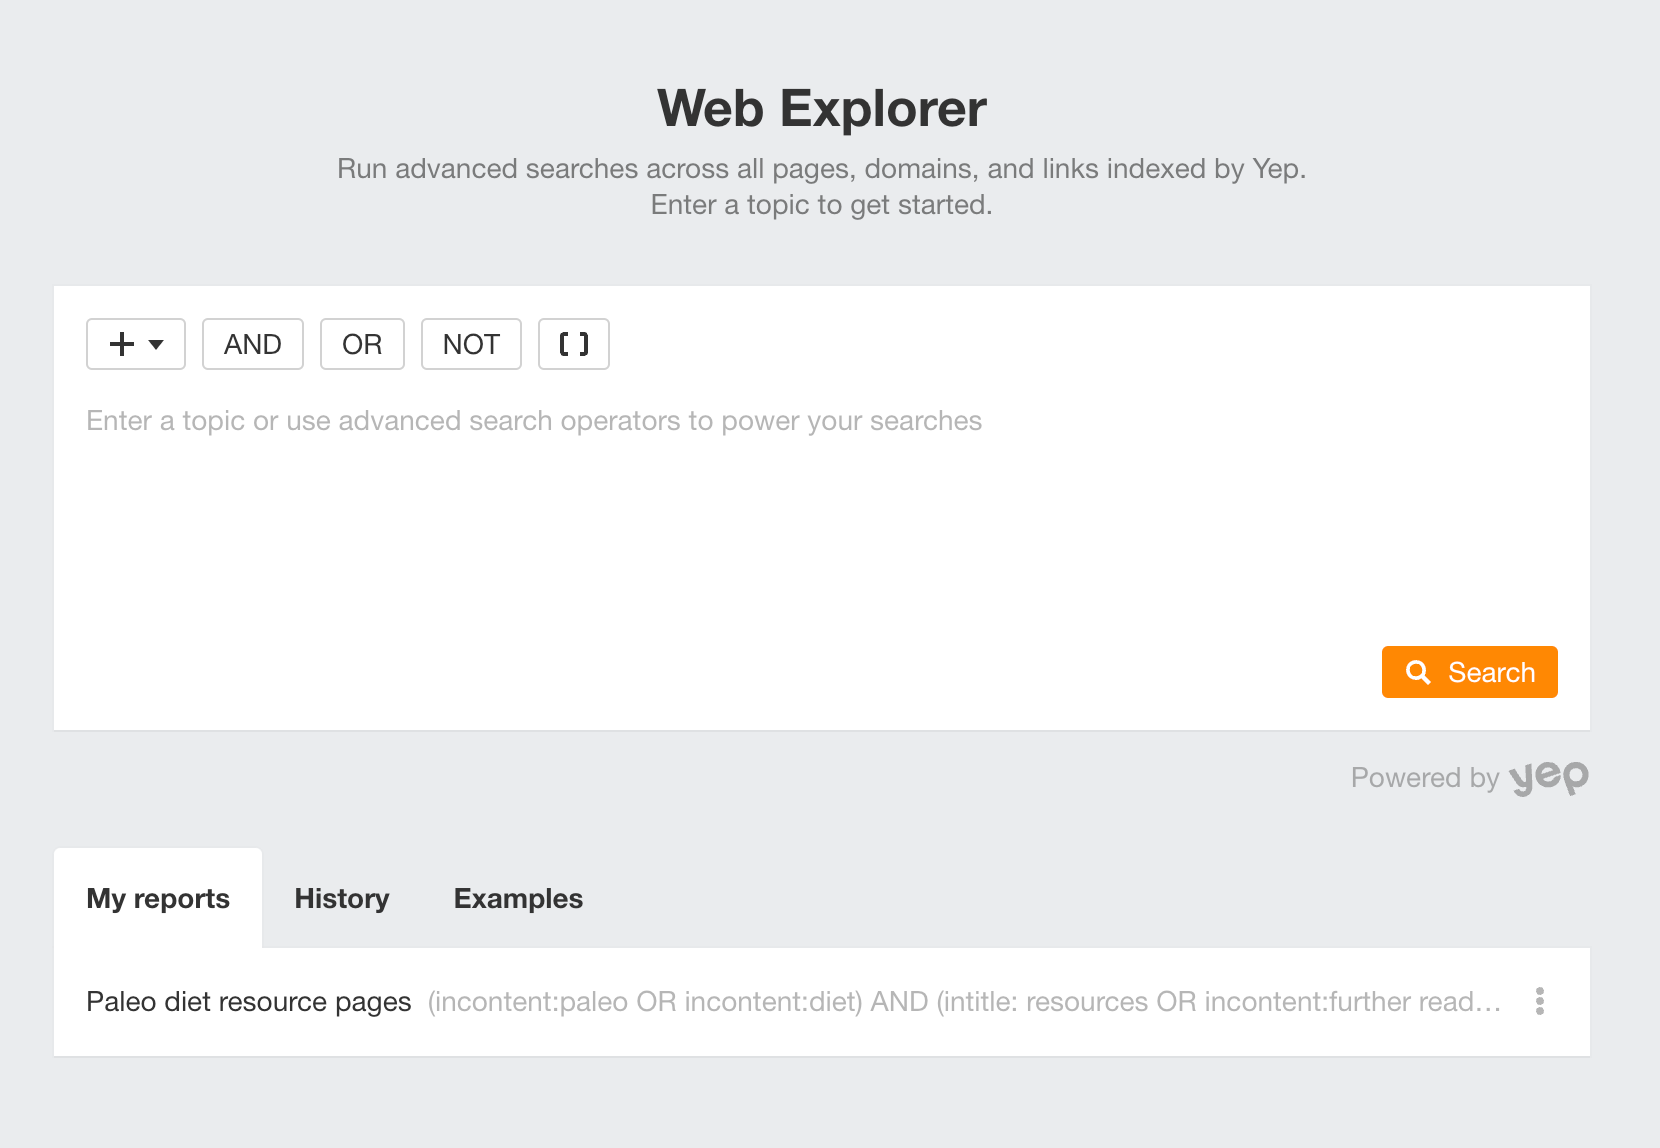 How to use Web Explorer-1